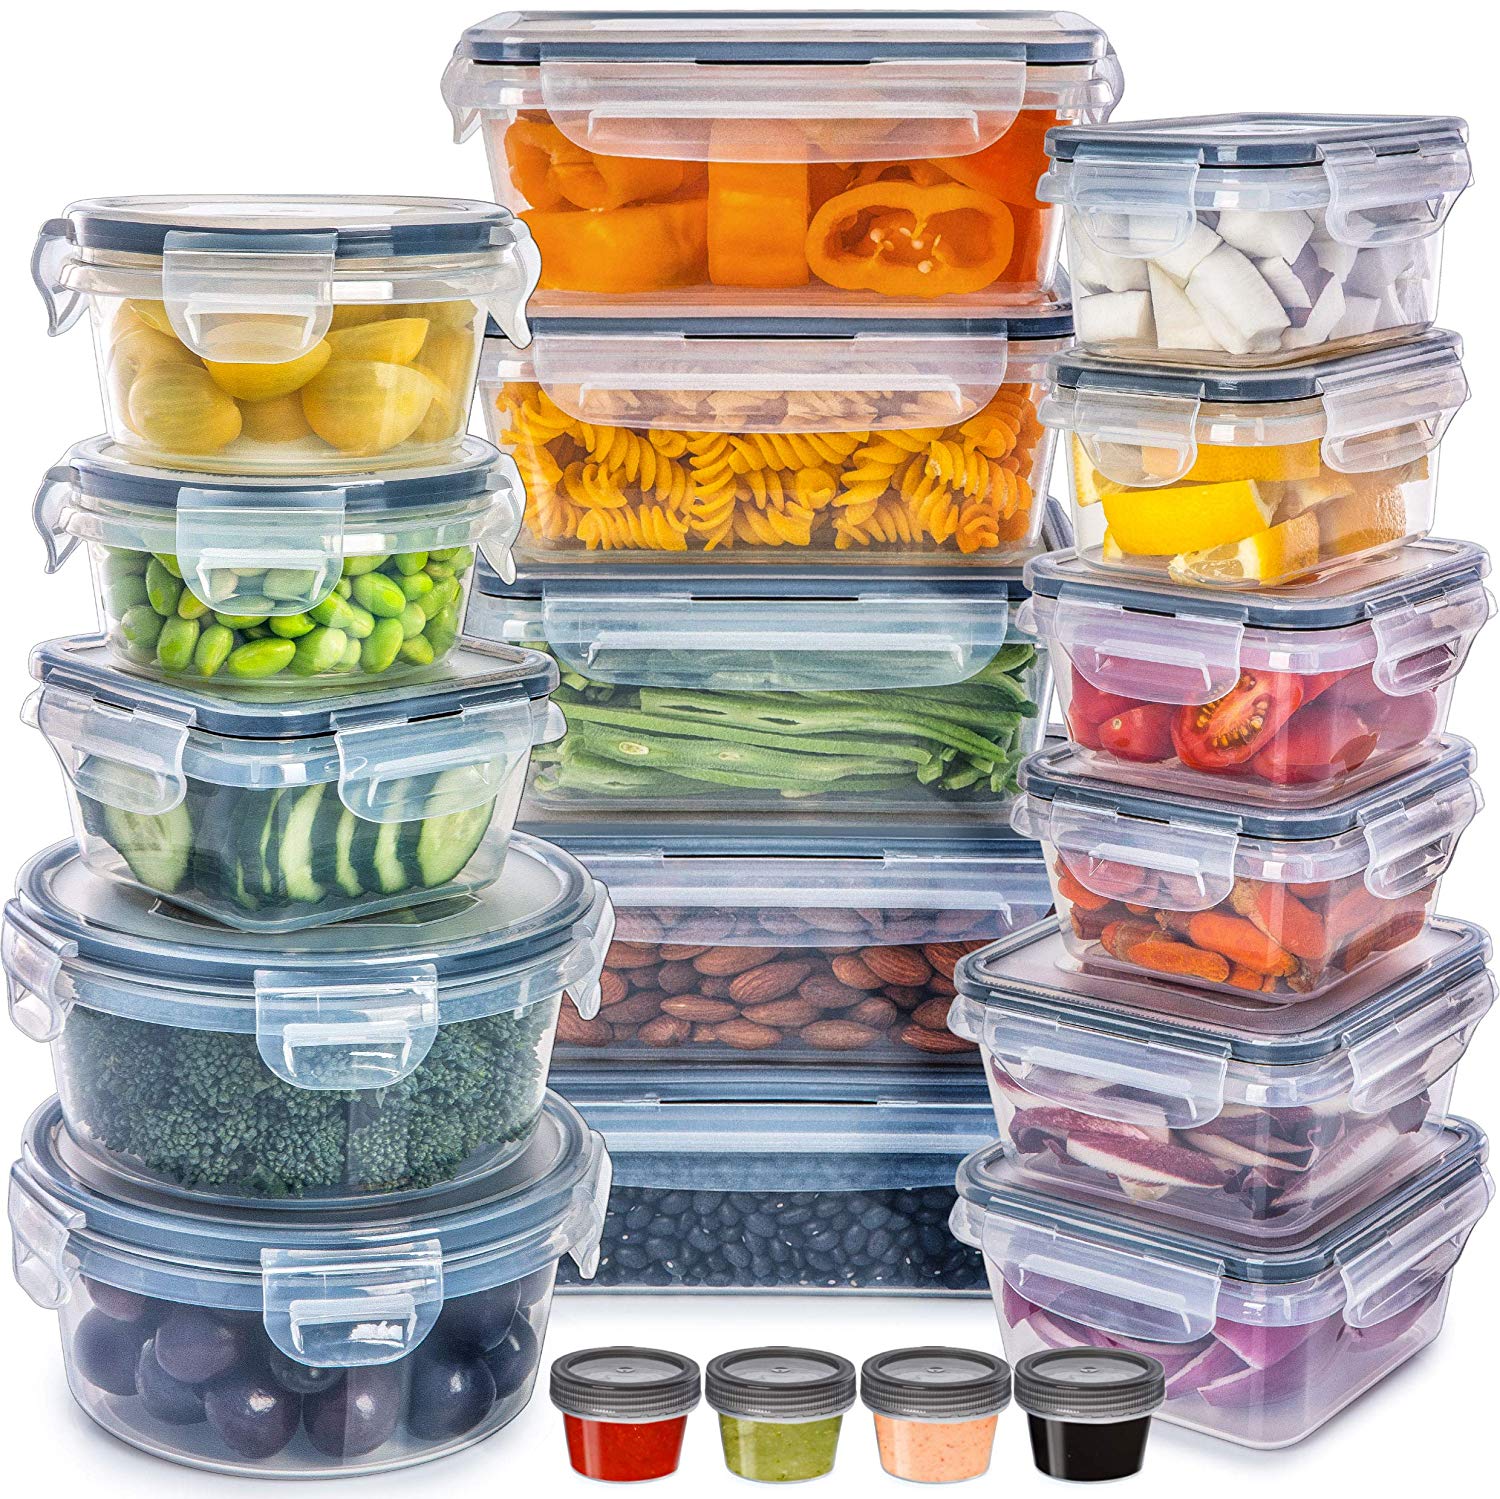 Fullstar Food Storage Containers with Lids, Set of 20